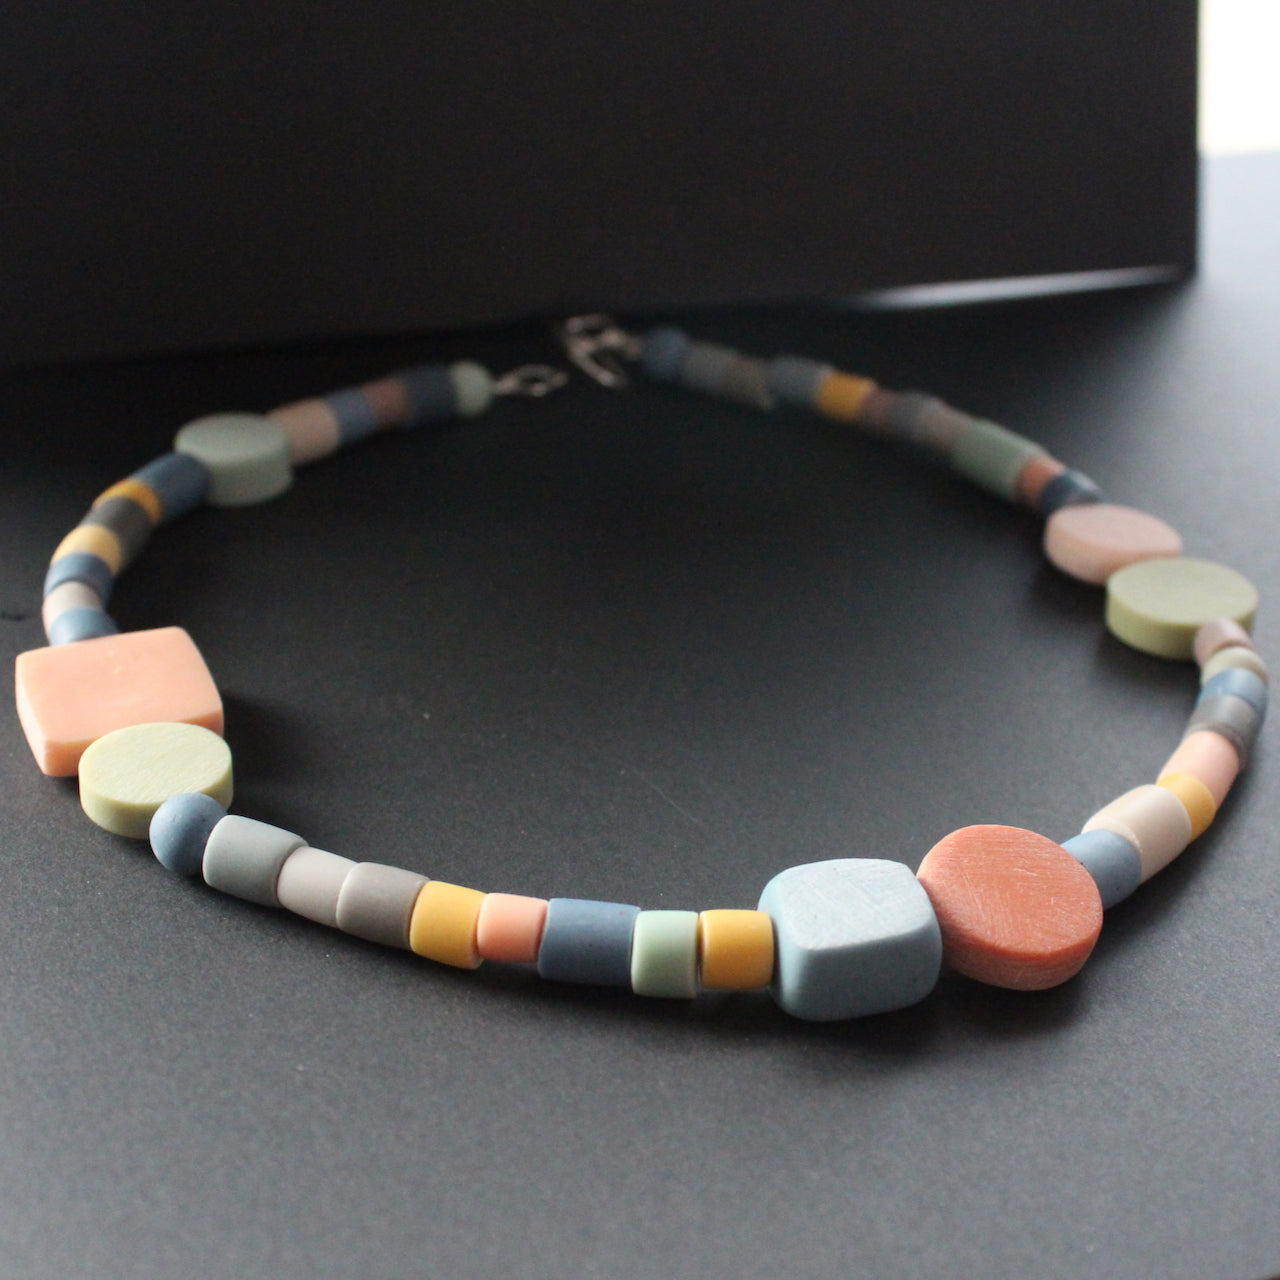 Clare Lloyd - Random Shapes Necklace, muted earth colours